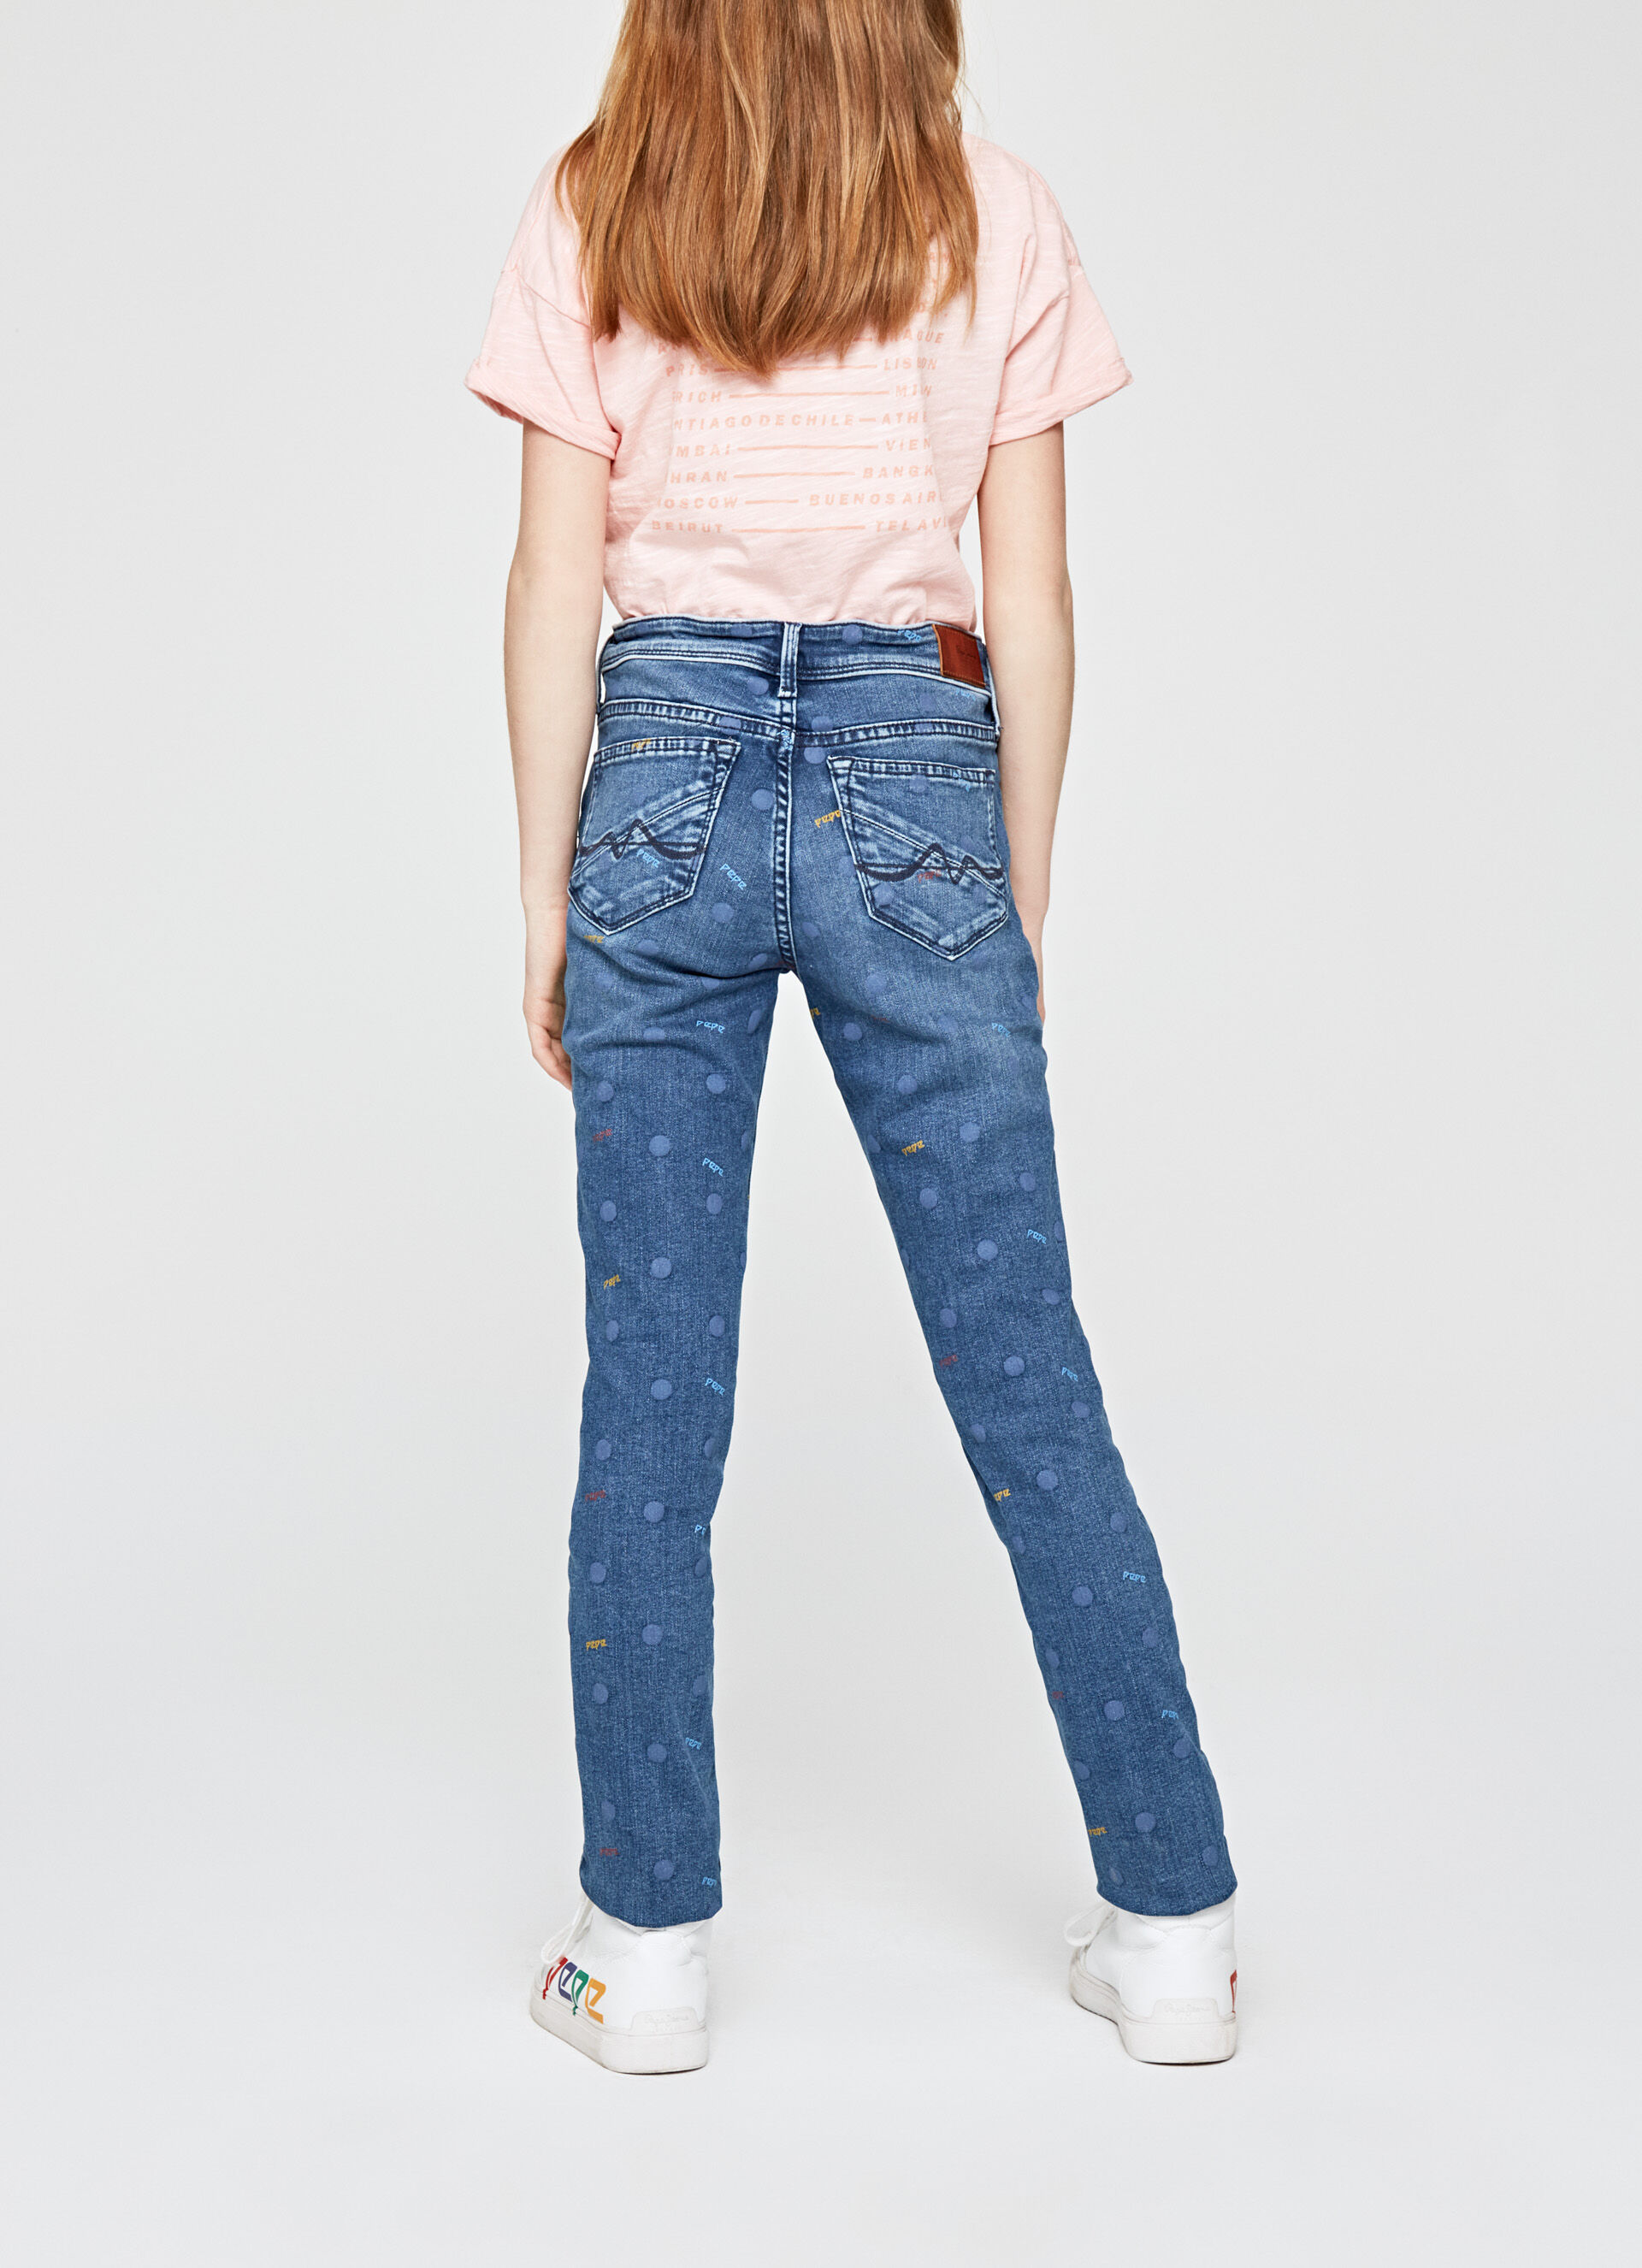 Pepe Jeans Girls Pixlette High Jeans